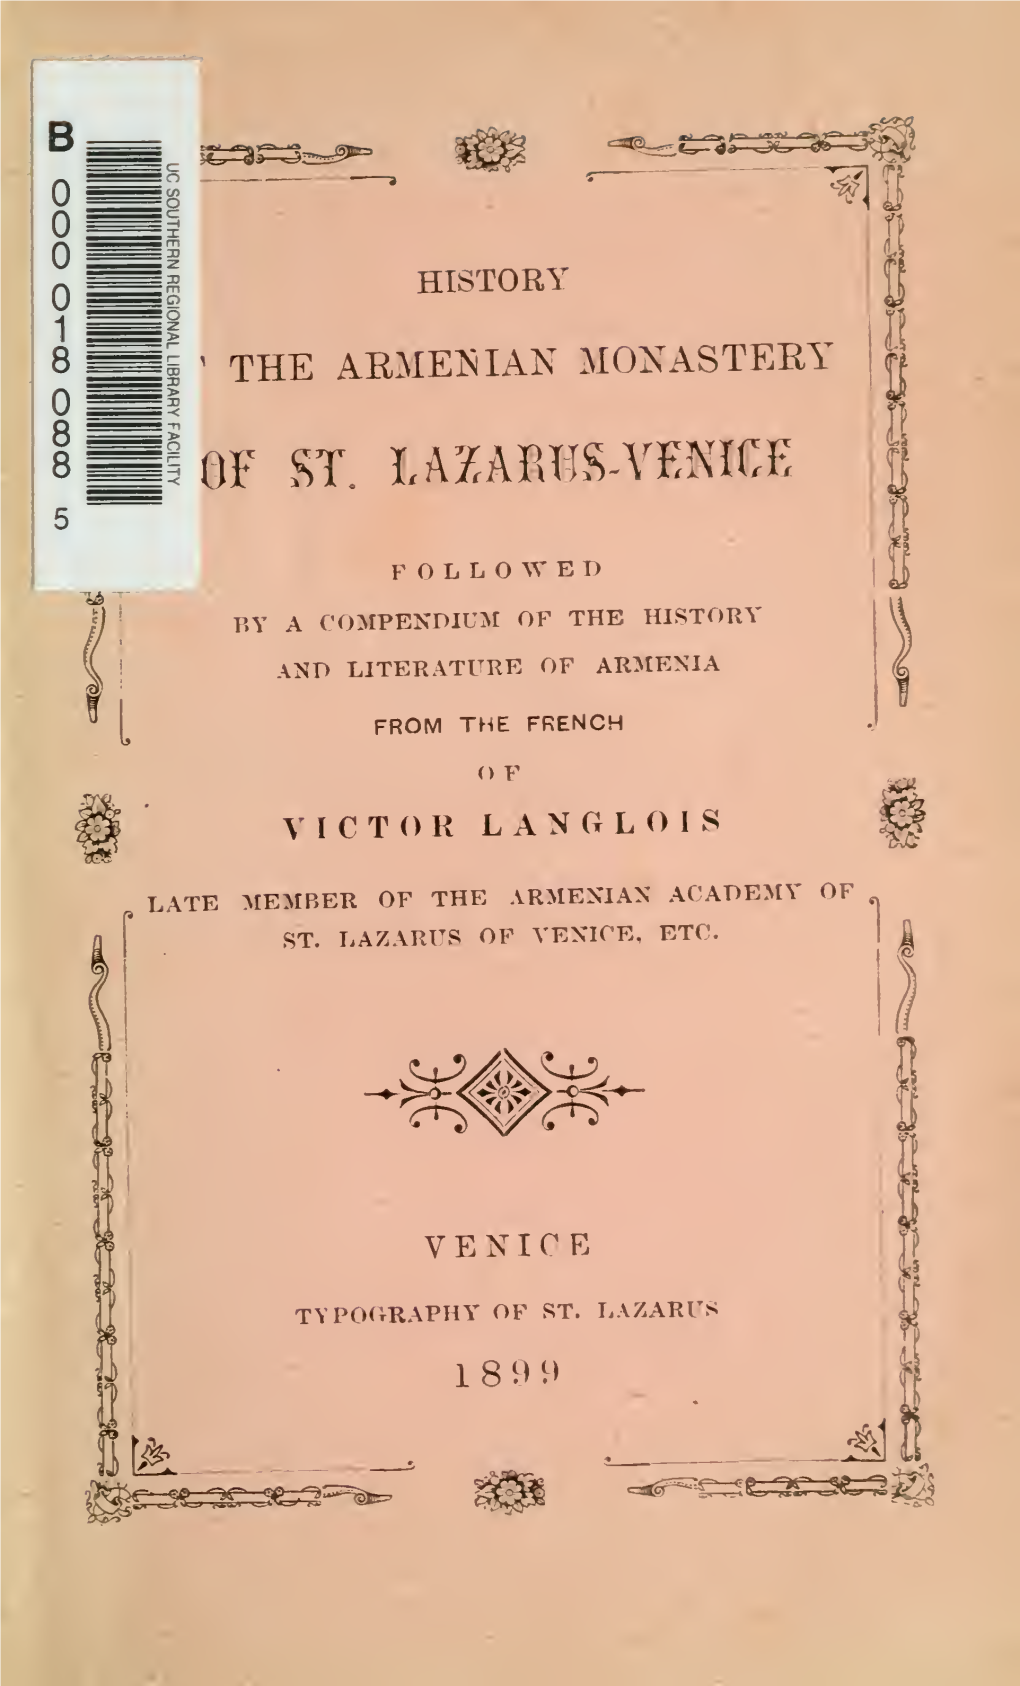 History of the Armenian Monastery of St. Lazarus-Venice, Followed by a Compendium of the History and Literature of Armenia